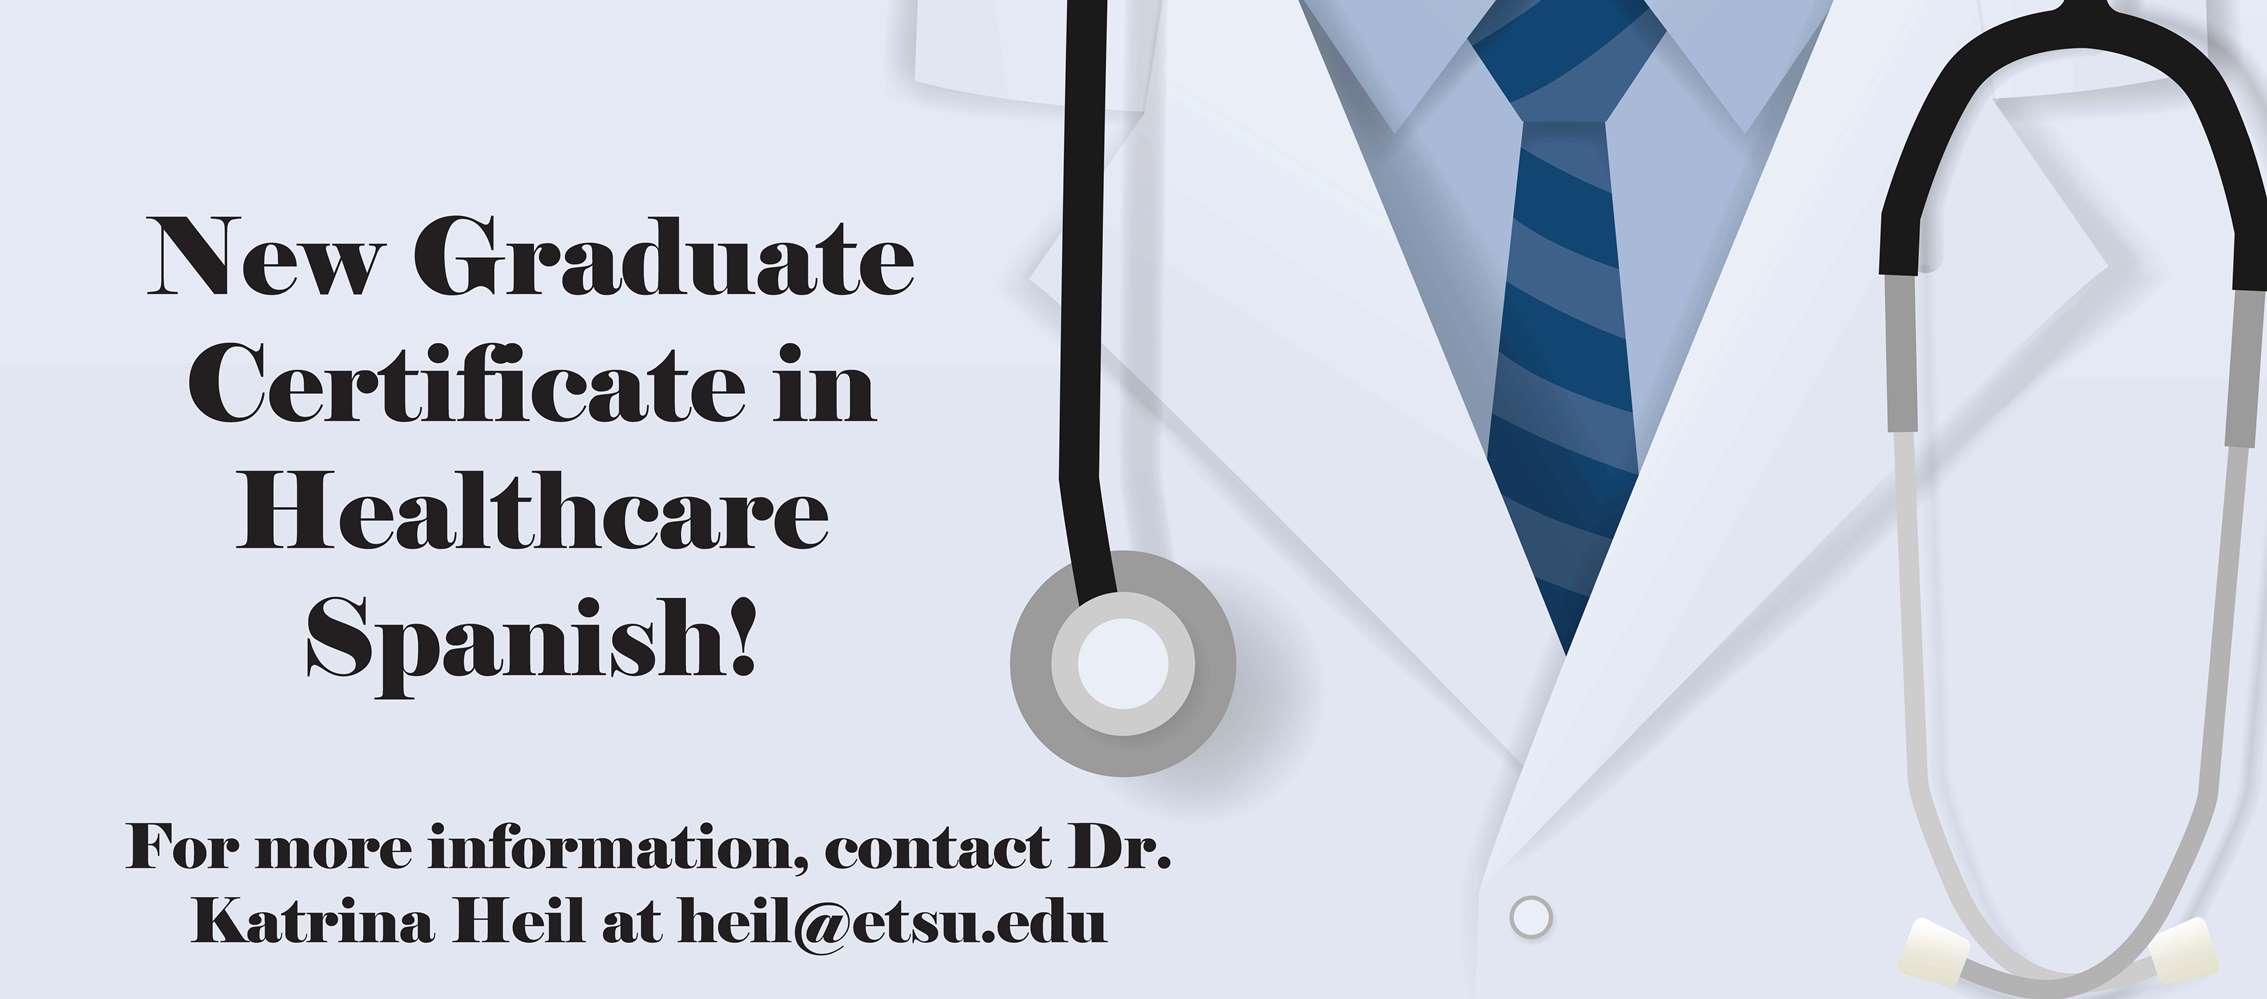 Abstract picture of a doctor's white coat with stethoscope with text that reads, "New Graduate Certificate in Healthcare Spanish! For more information, contact Dr. Katrina Heil at heil@etsu.edu"